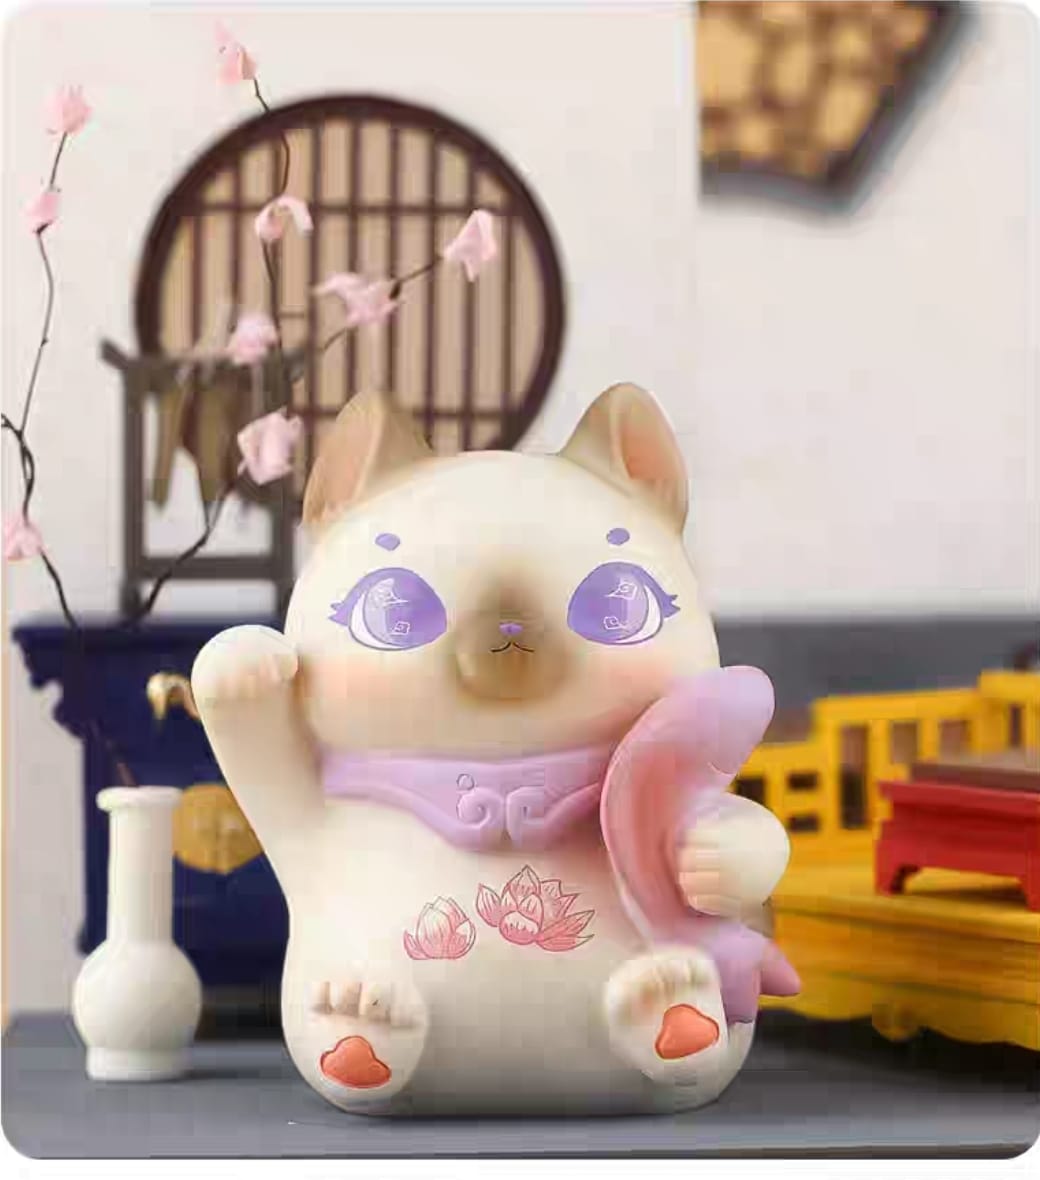 OAA-2020476 Blind Box Lucky Fortune Cat (S)